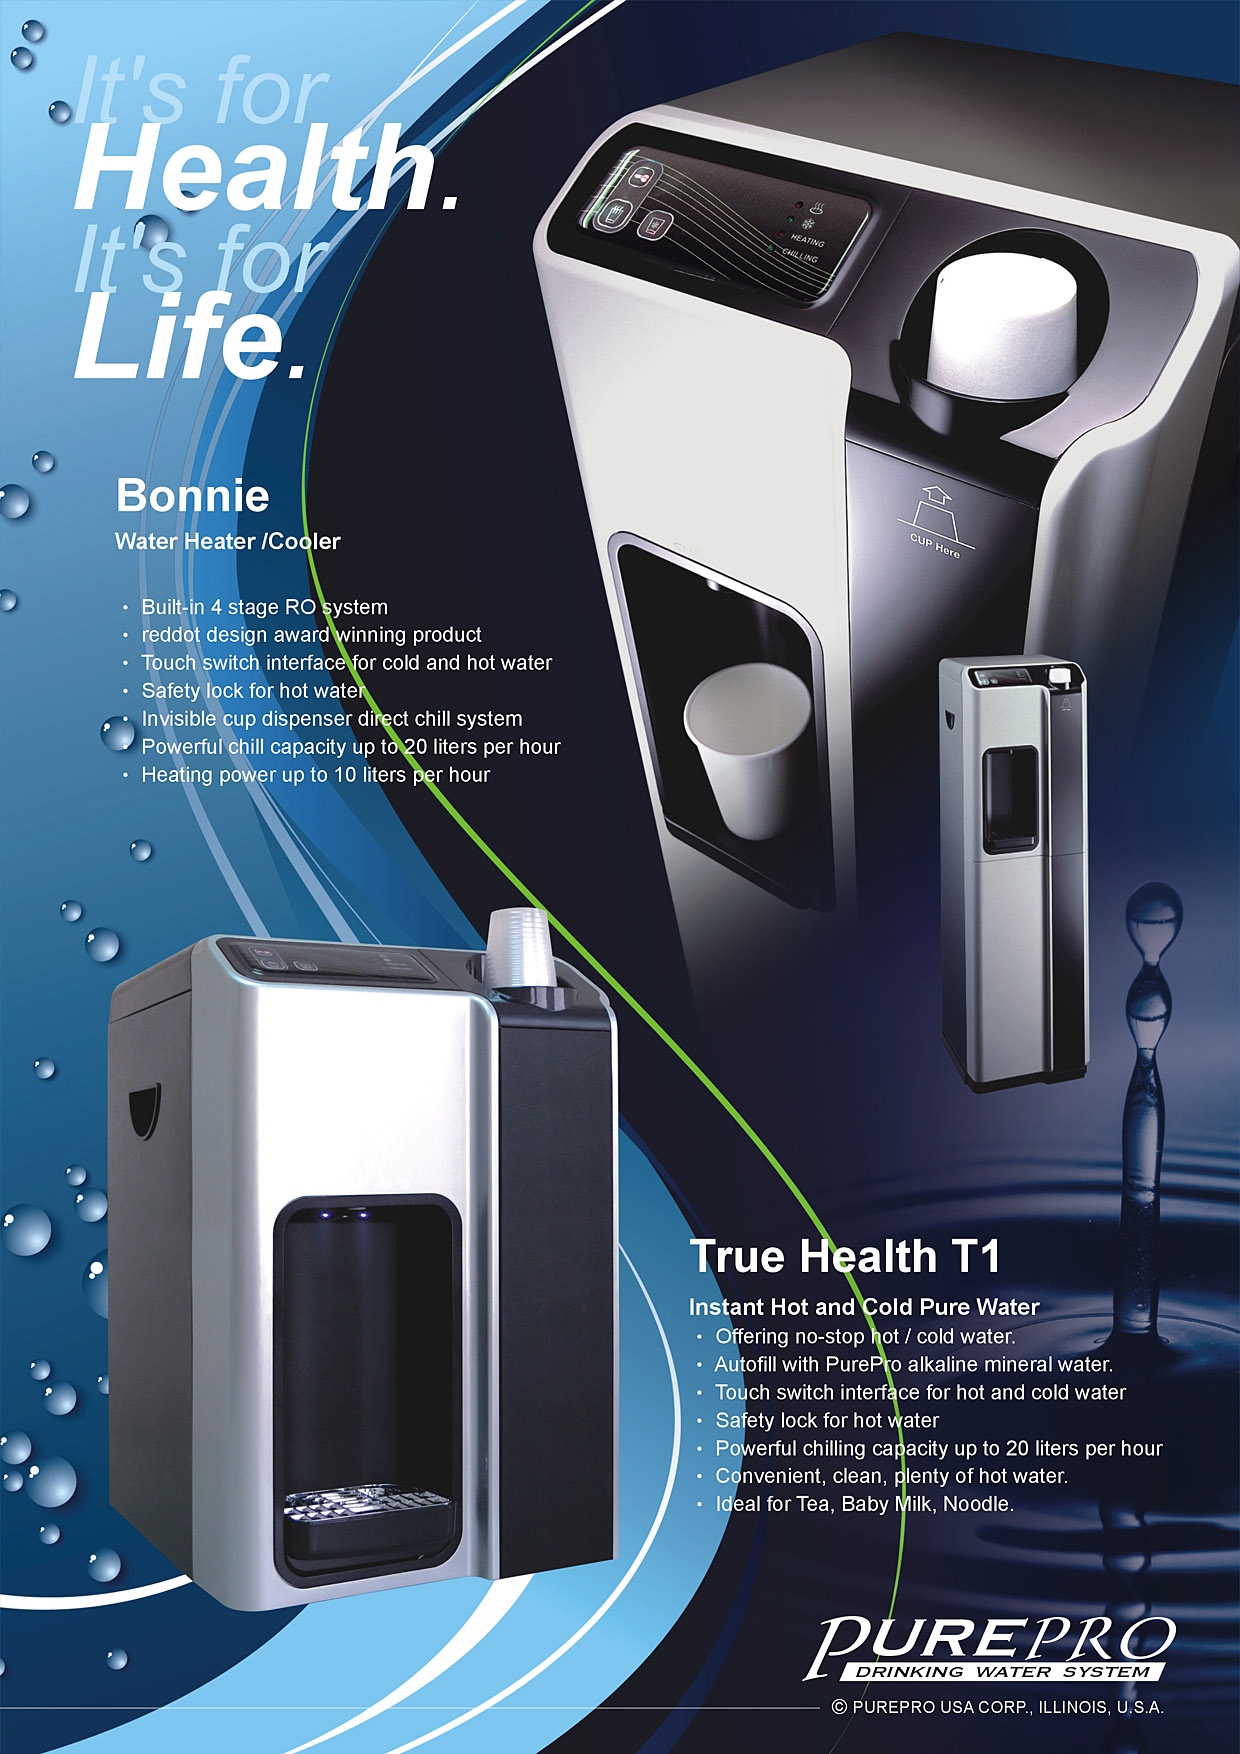 Top 10 Most Popular Products of PurePro in the U.S. - PurePro Bonnie & PurePro T1